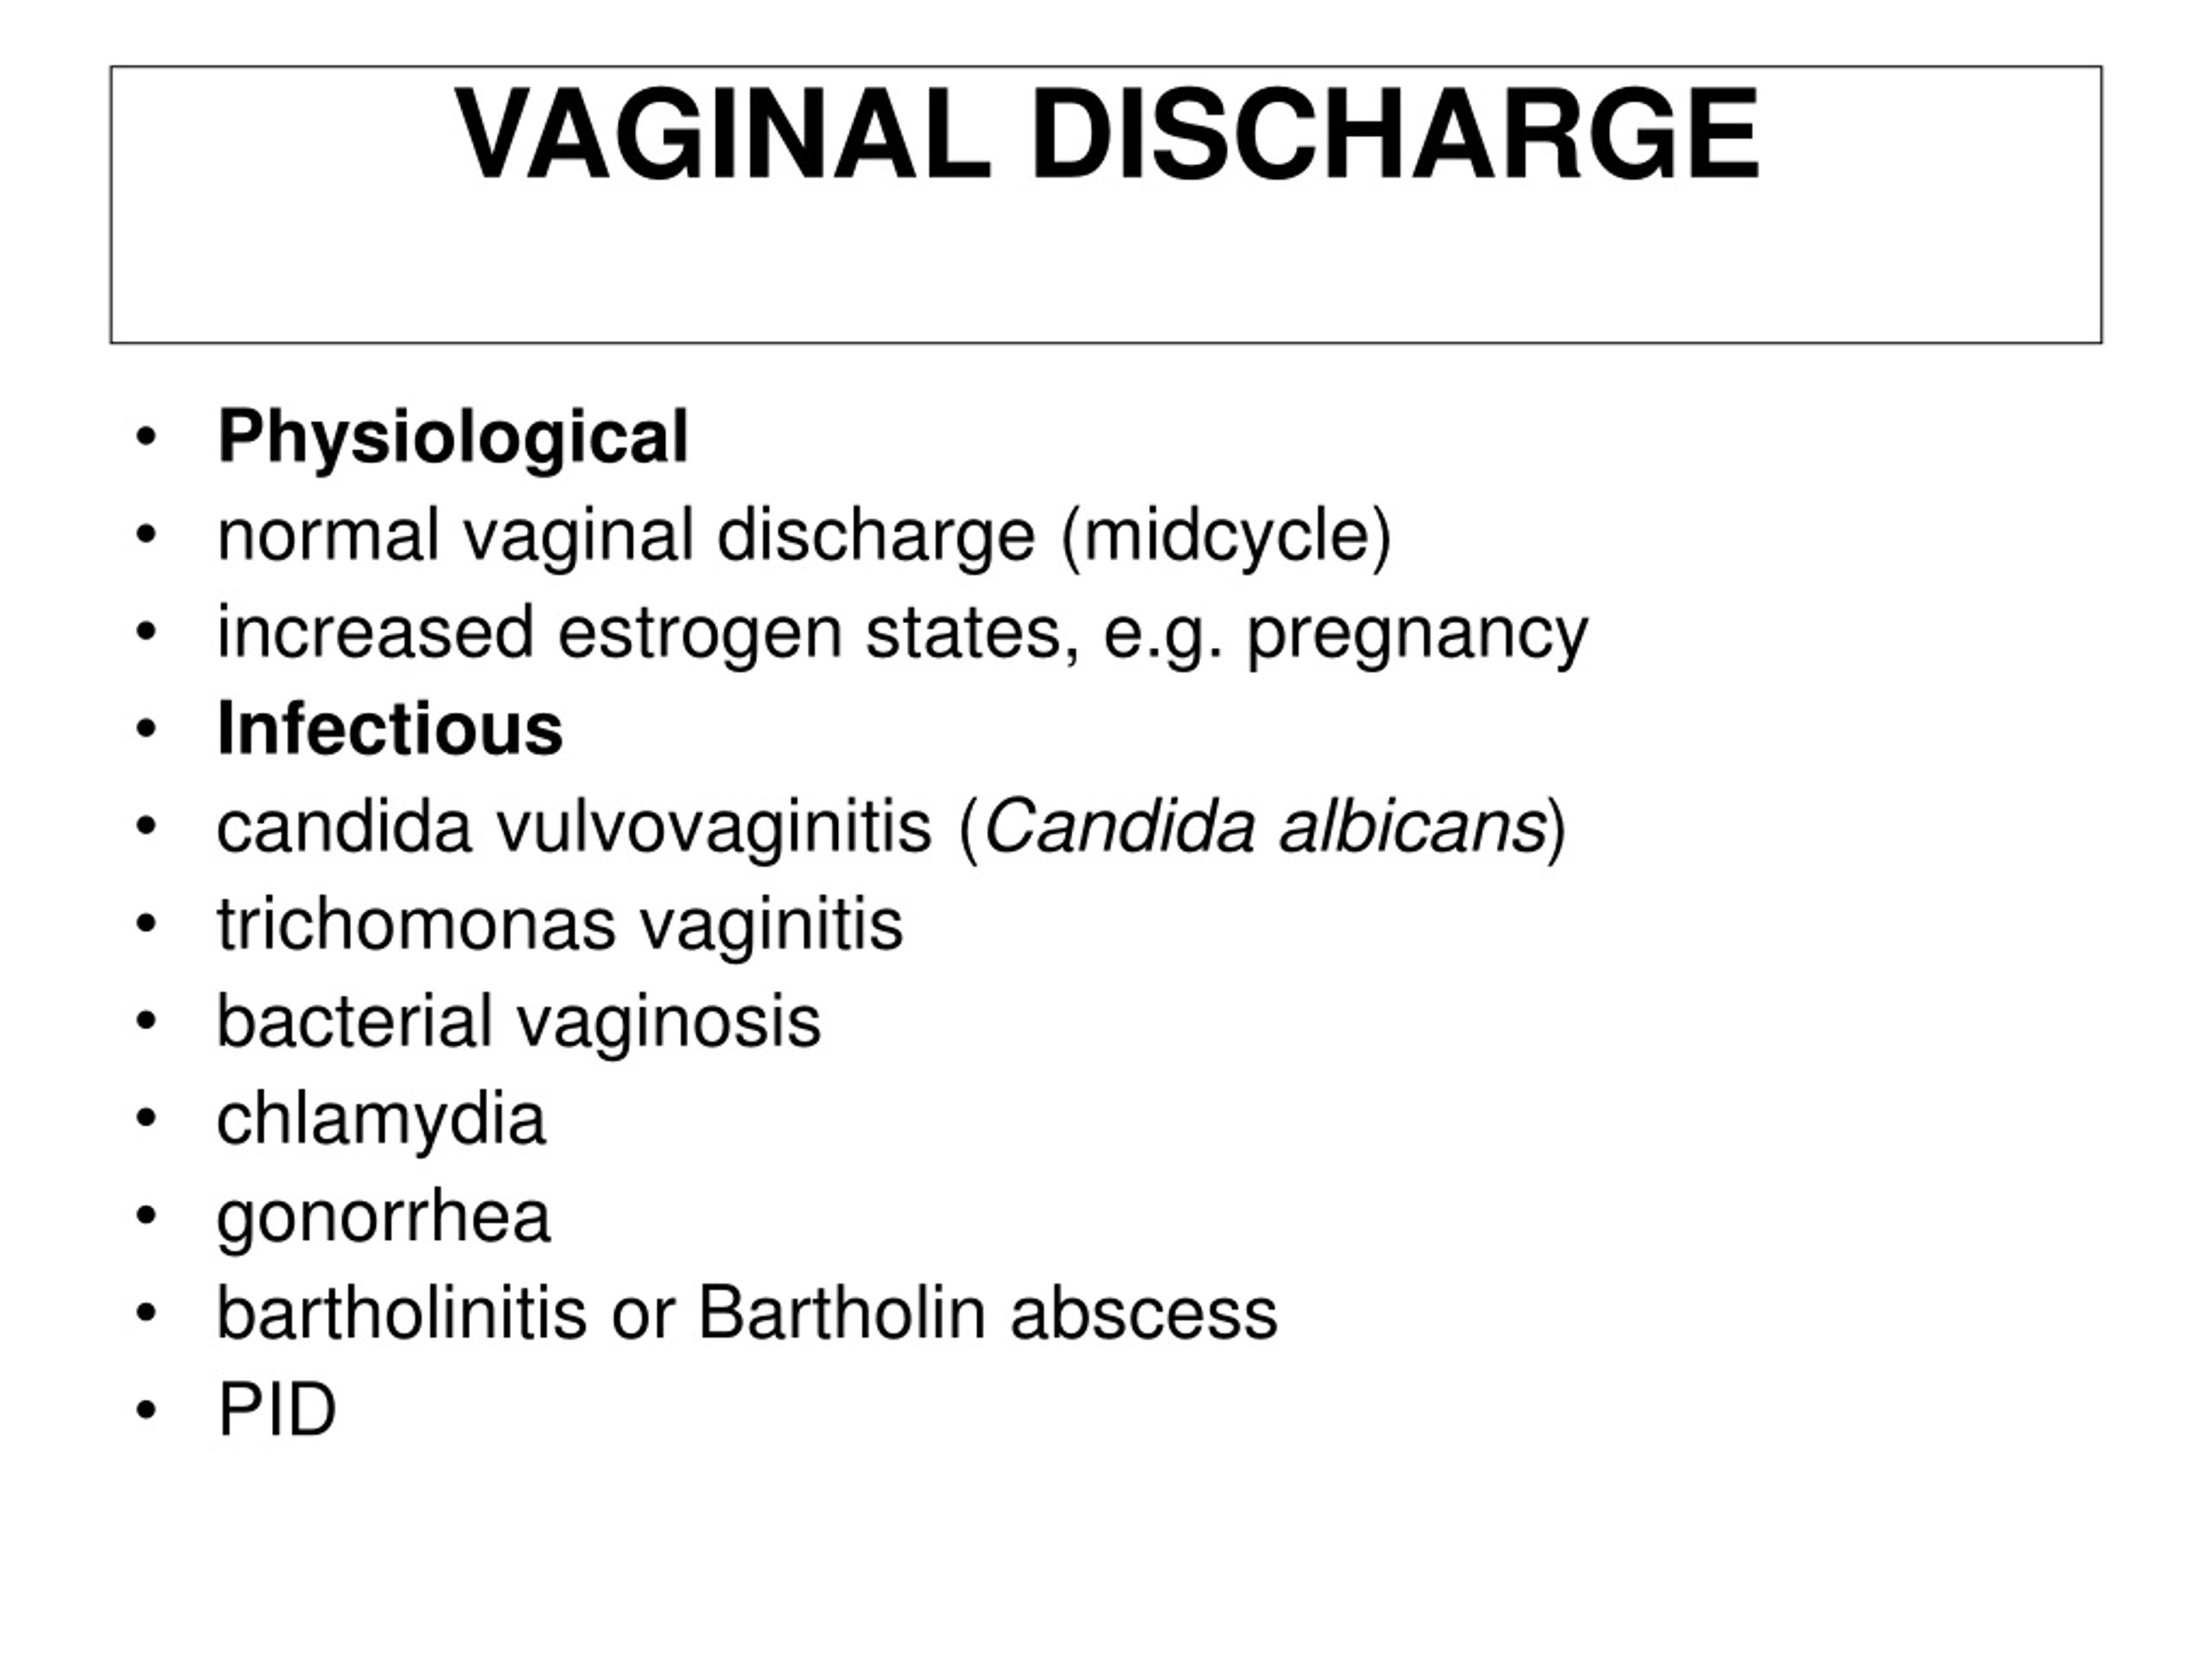 Ppt Vaginal Discharge Powerpoint Presentation Free Download Id9098717 9533